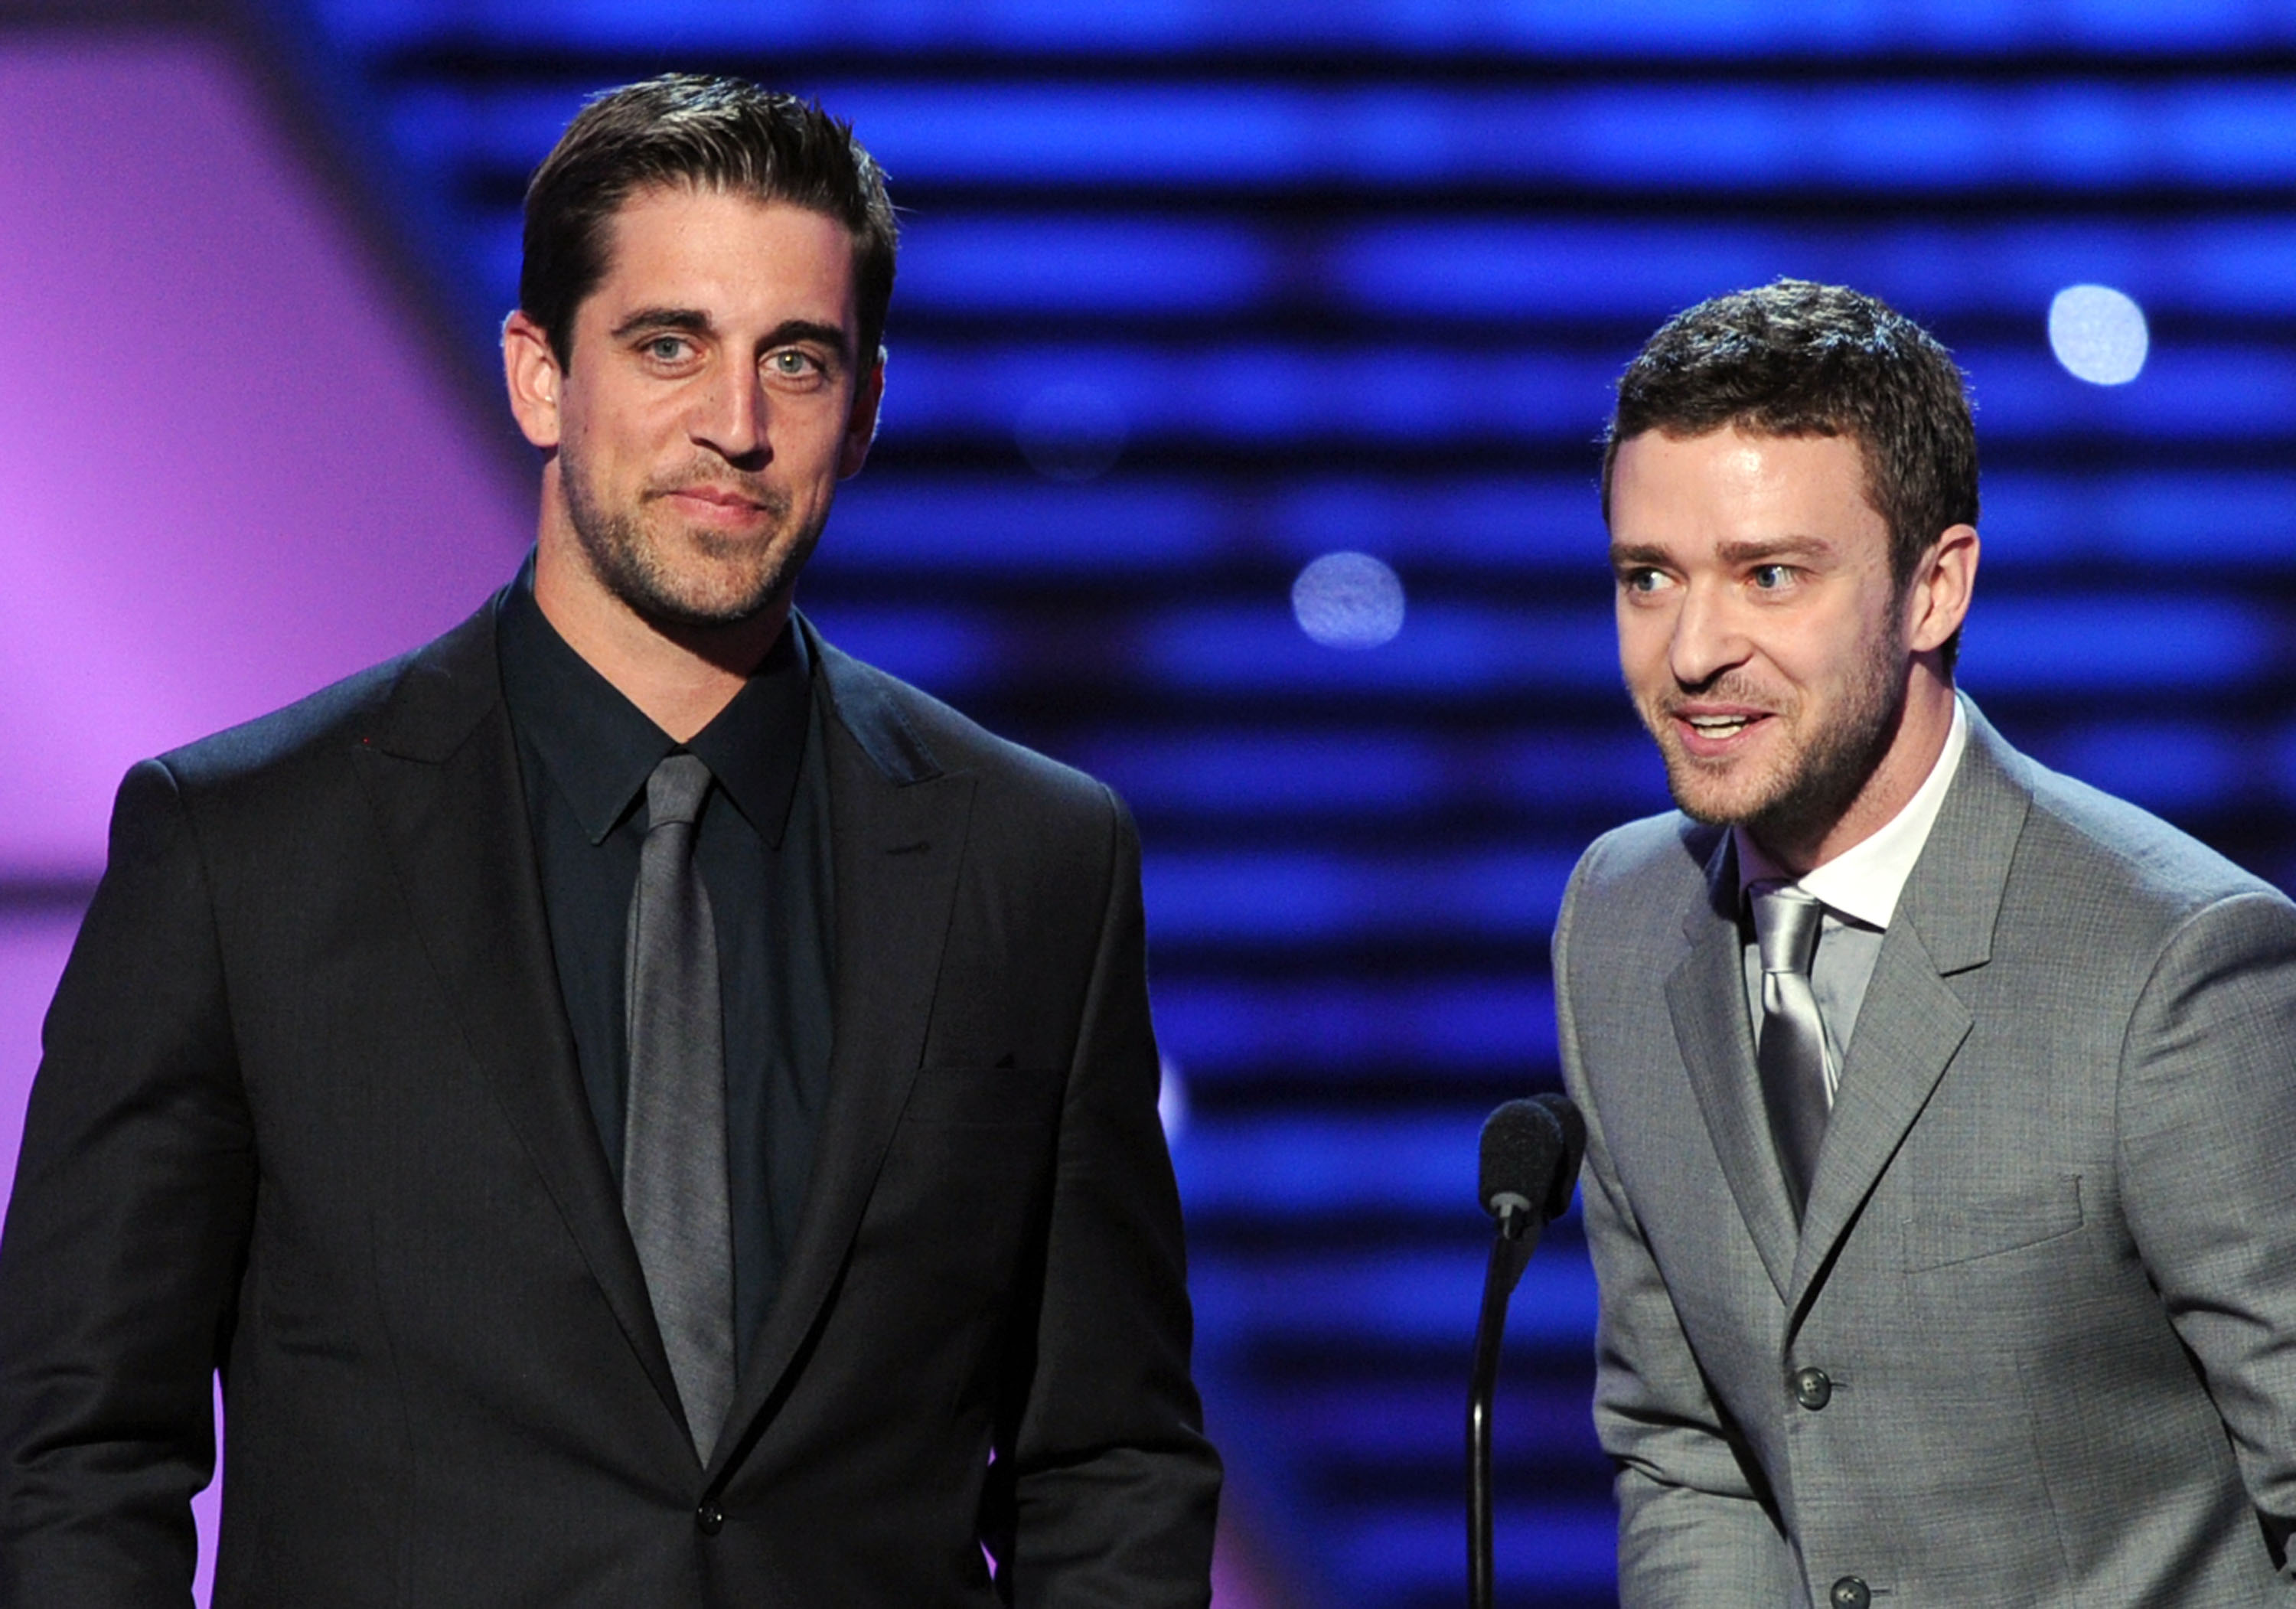 Aaron Rodgers and Justin Timberlake at the ESPYS